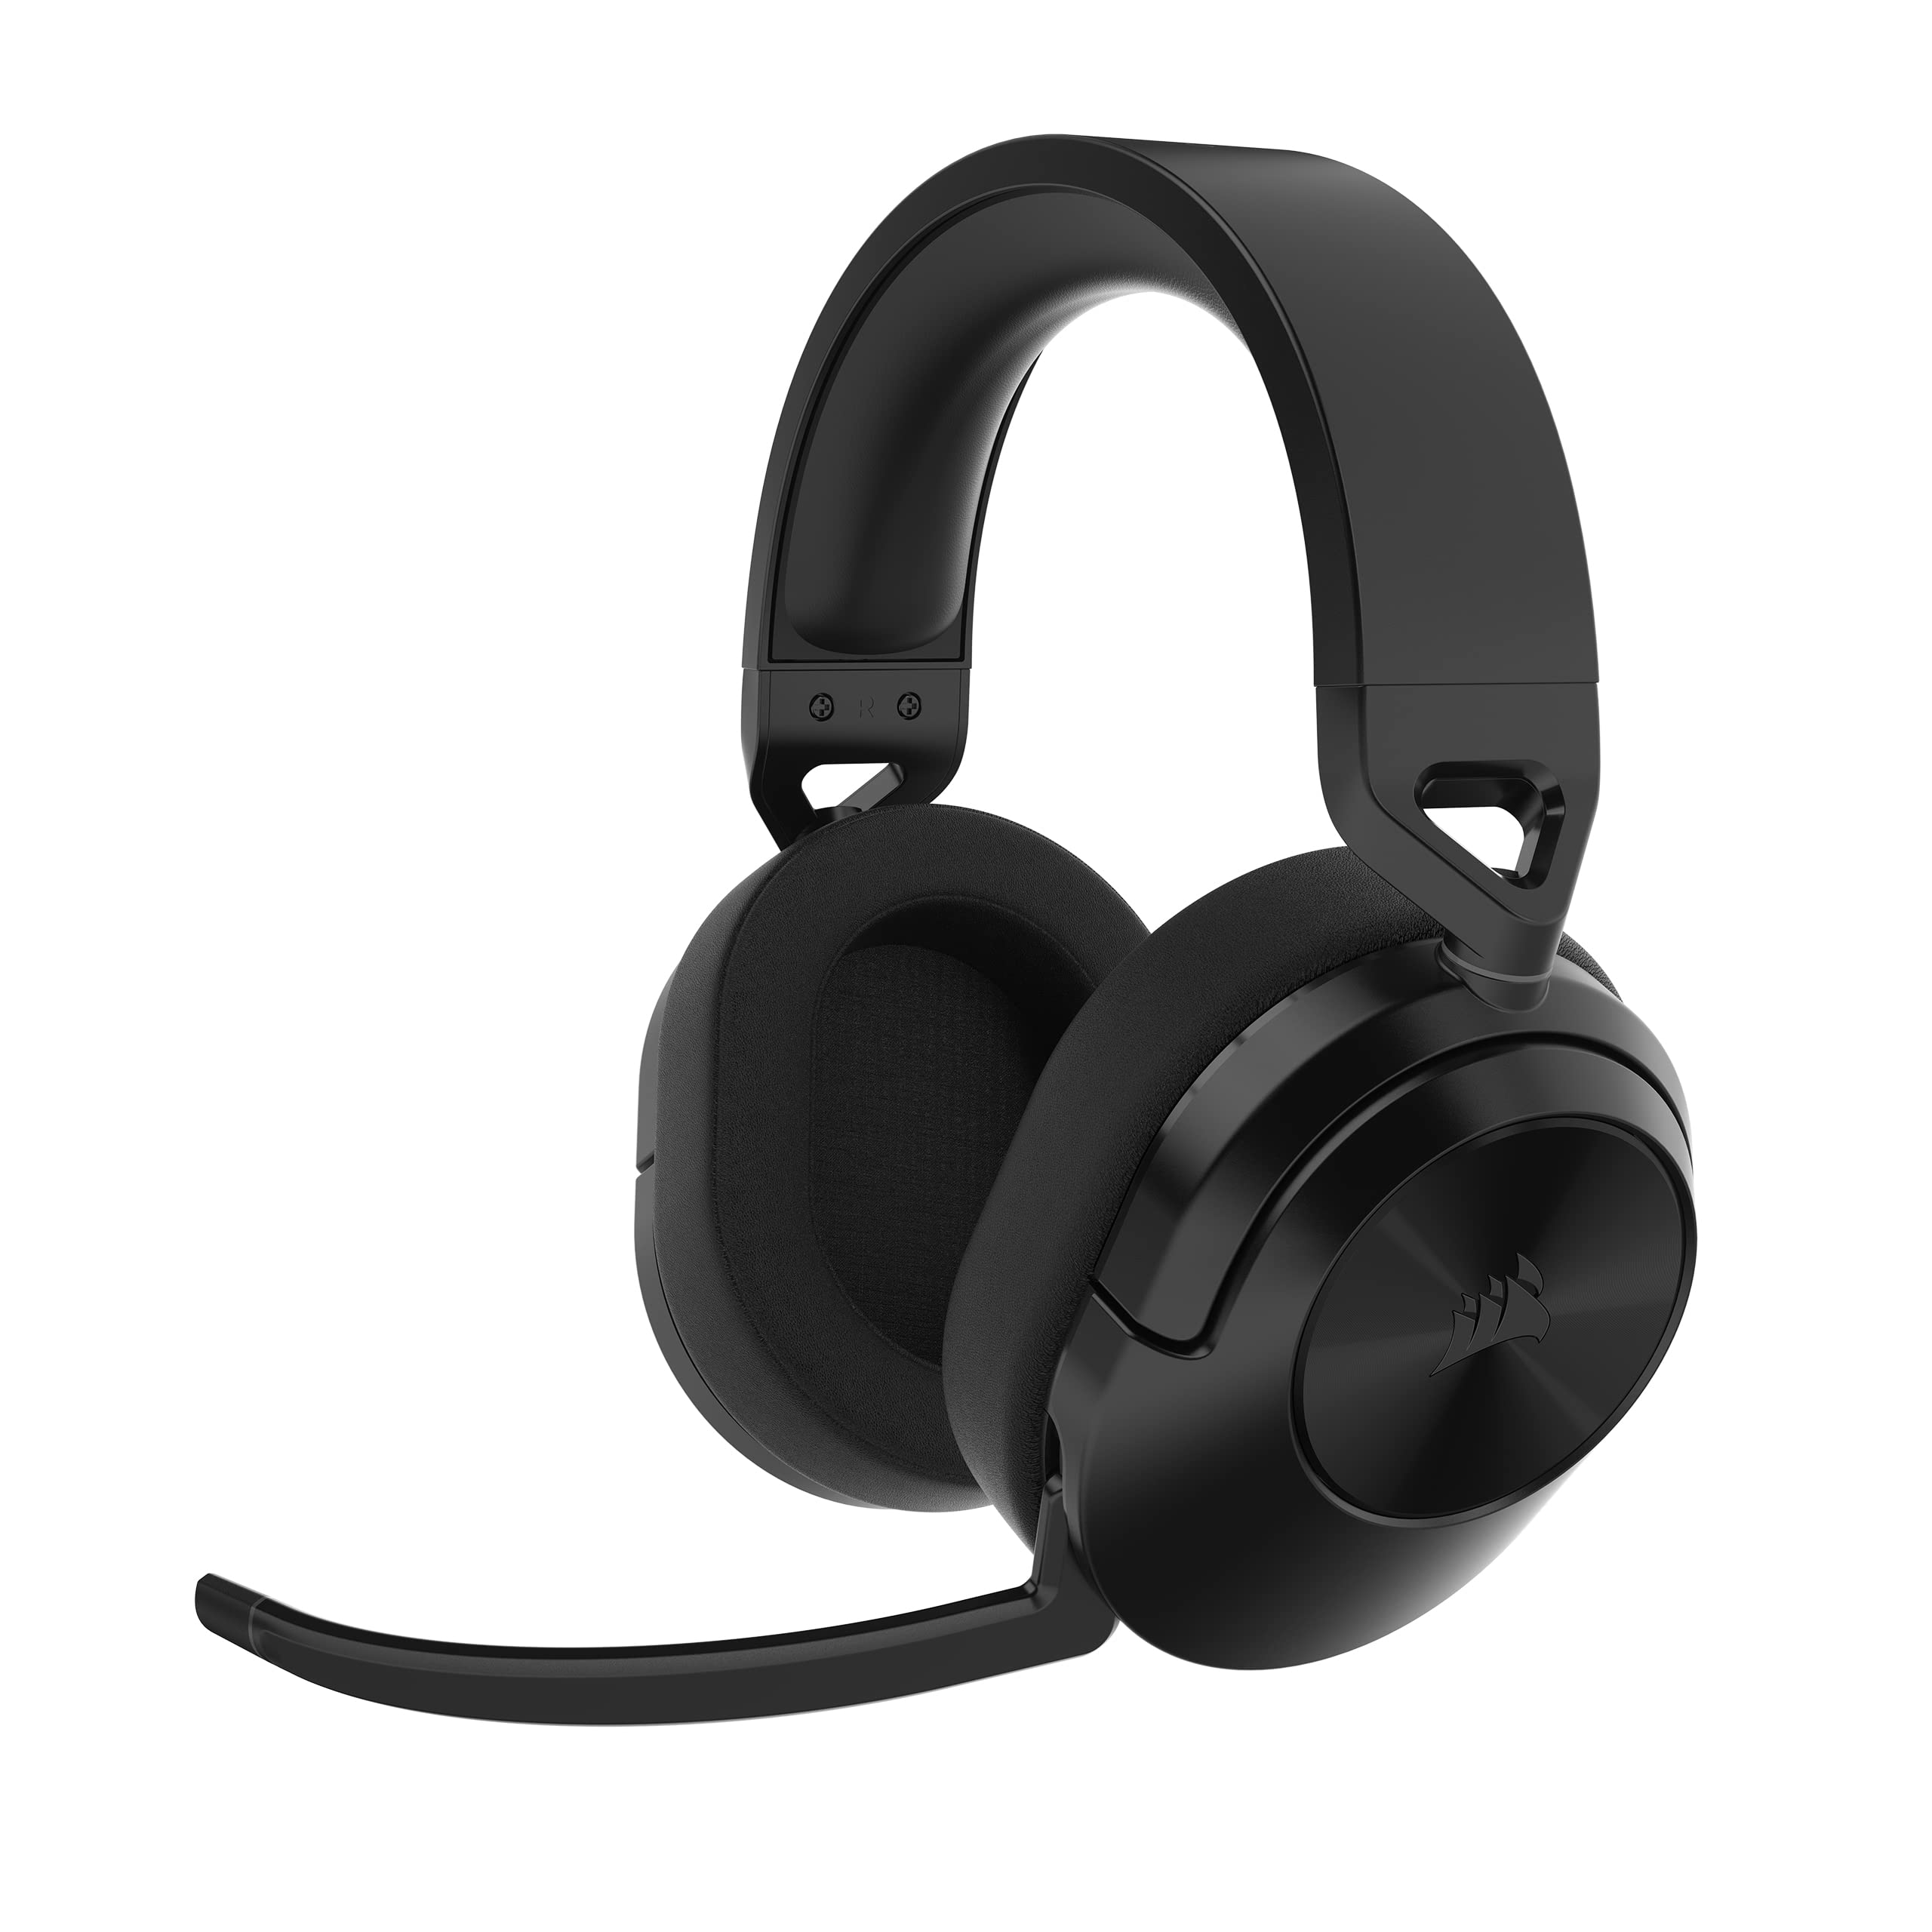 Corsair HS55 Wireless CORE Black Gaming Headset (PS5, PS4, PC) $56.29 + Free Shipping